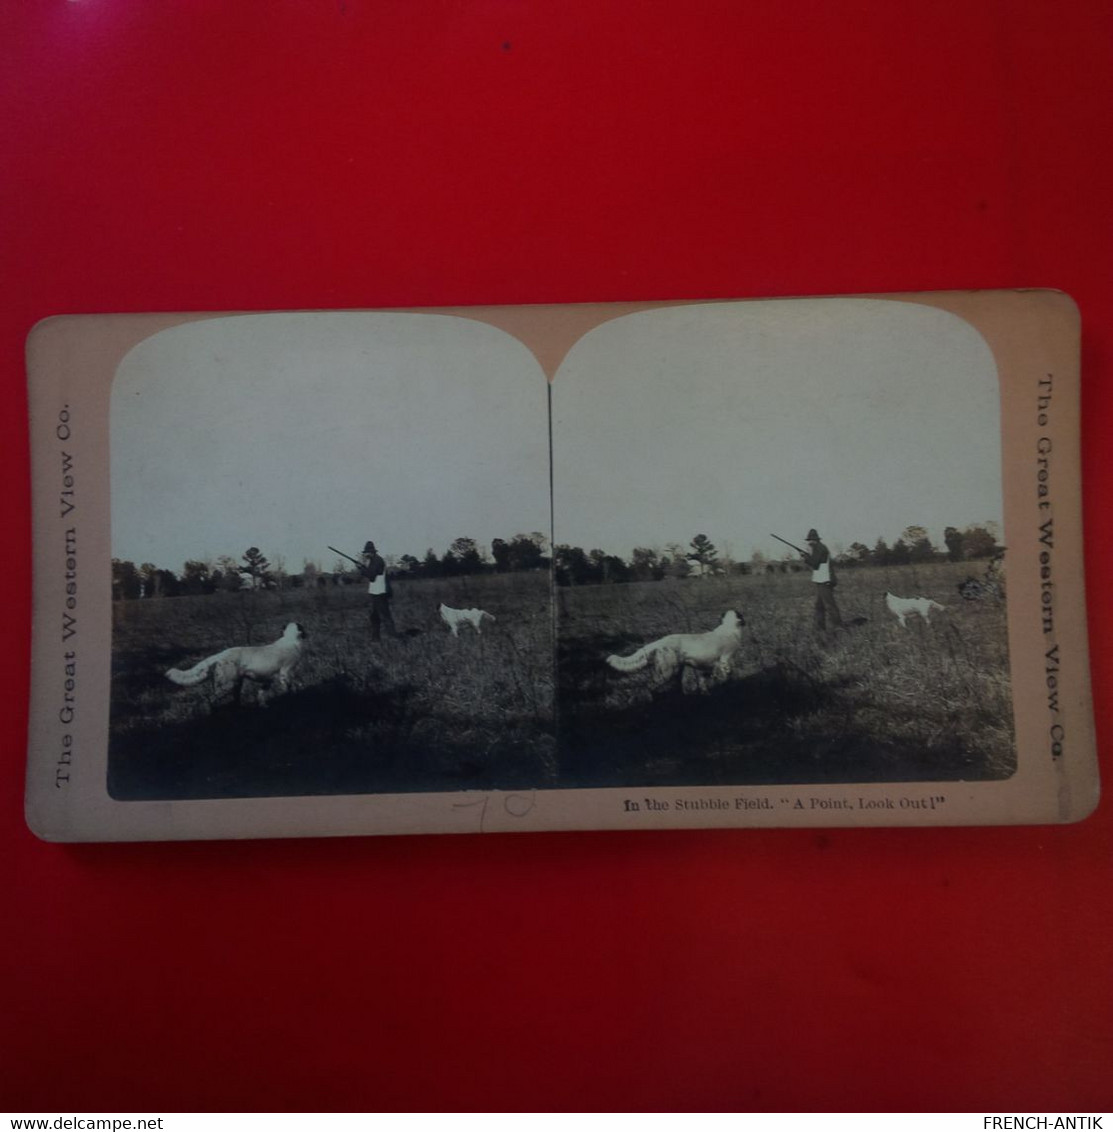 PHOTO STEREO THE GREAT WESTERN IN THE STUBBLE FIELD A POINT LOOK OUT ! CHASSEUR - Photos Stéréoscopiques